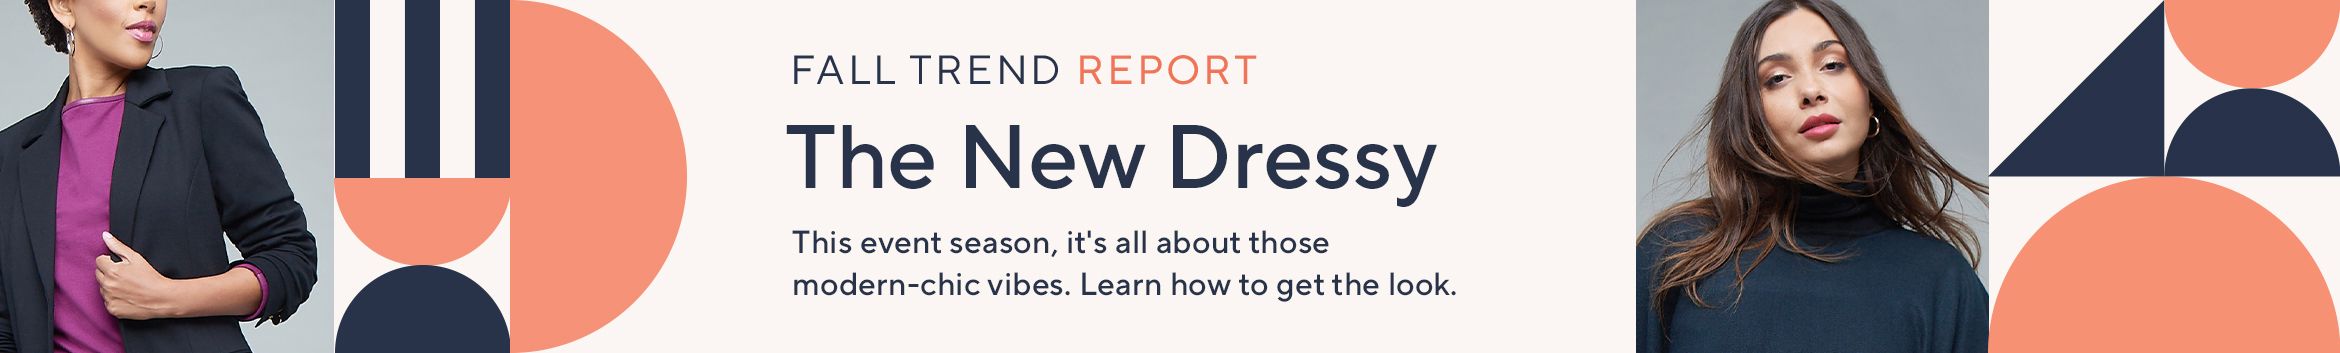 Fall Trend Report: The New Dressy- This event season, it's all about those modern-chic vibes. Learn how to get the look.